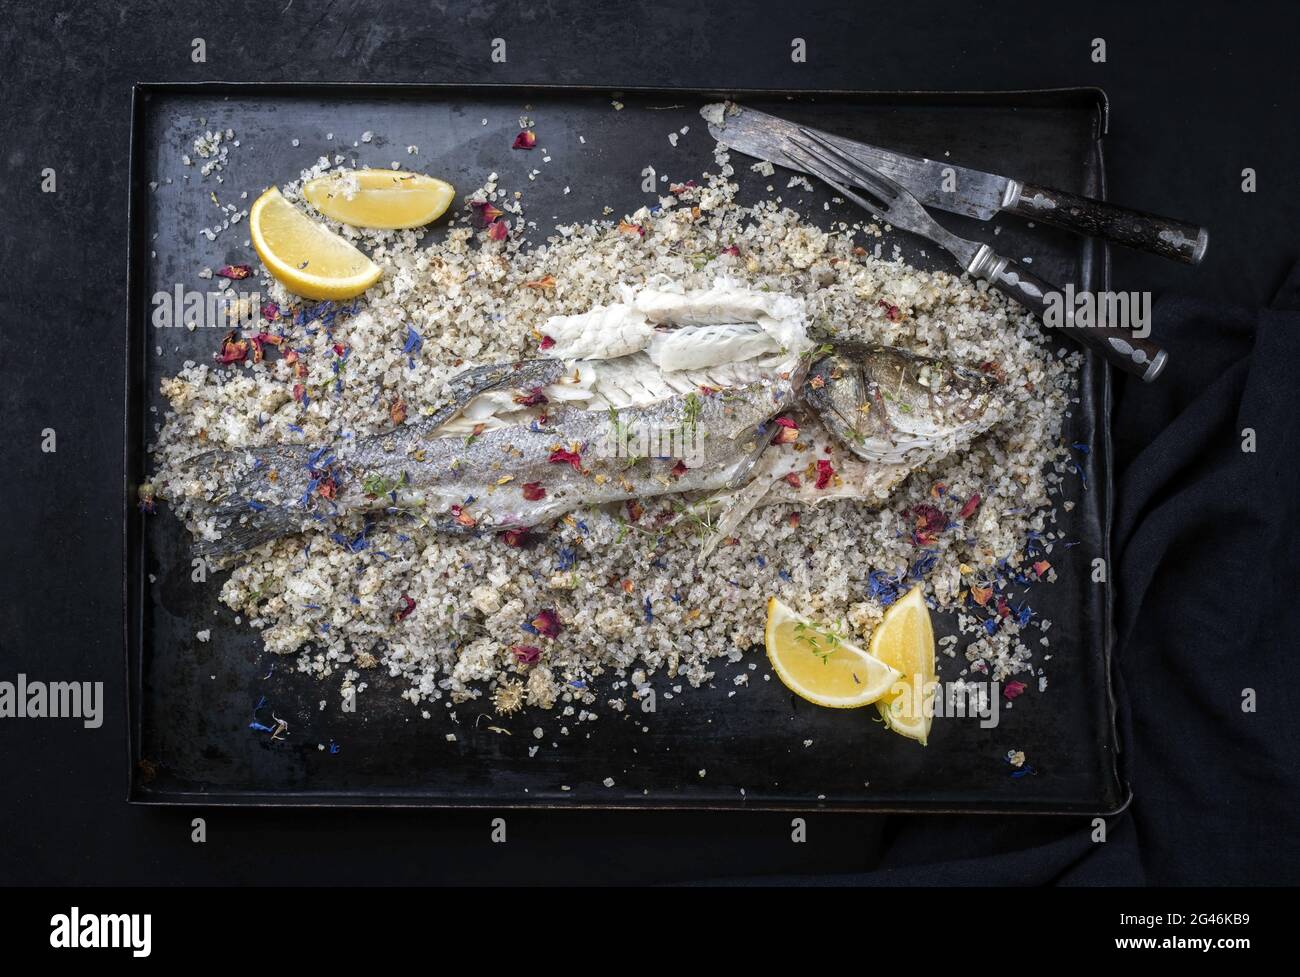 Traditional Atlantic Loup de Mer bedded into sea salt served with lemon slices and spices as top view on a rustic metal tray Stock Photo